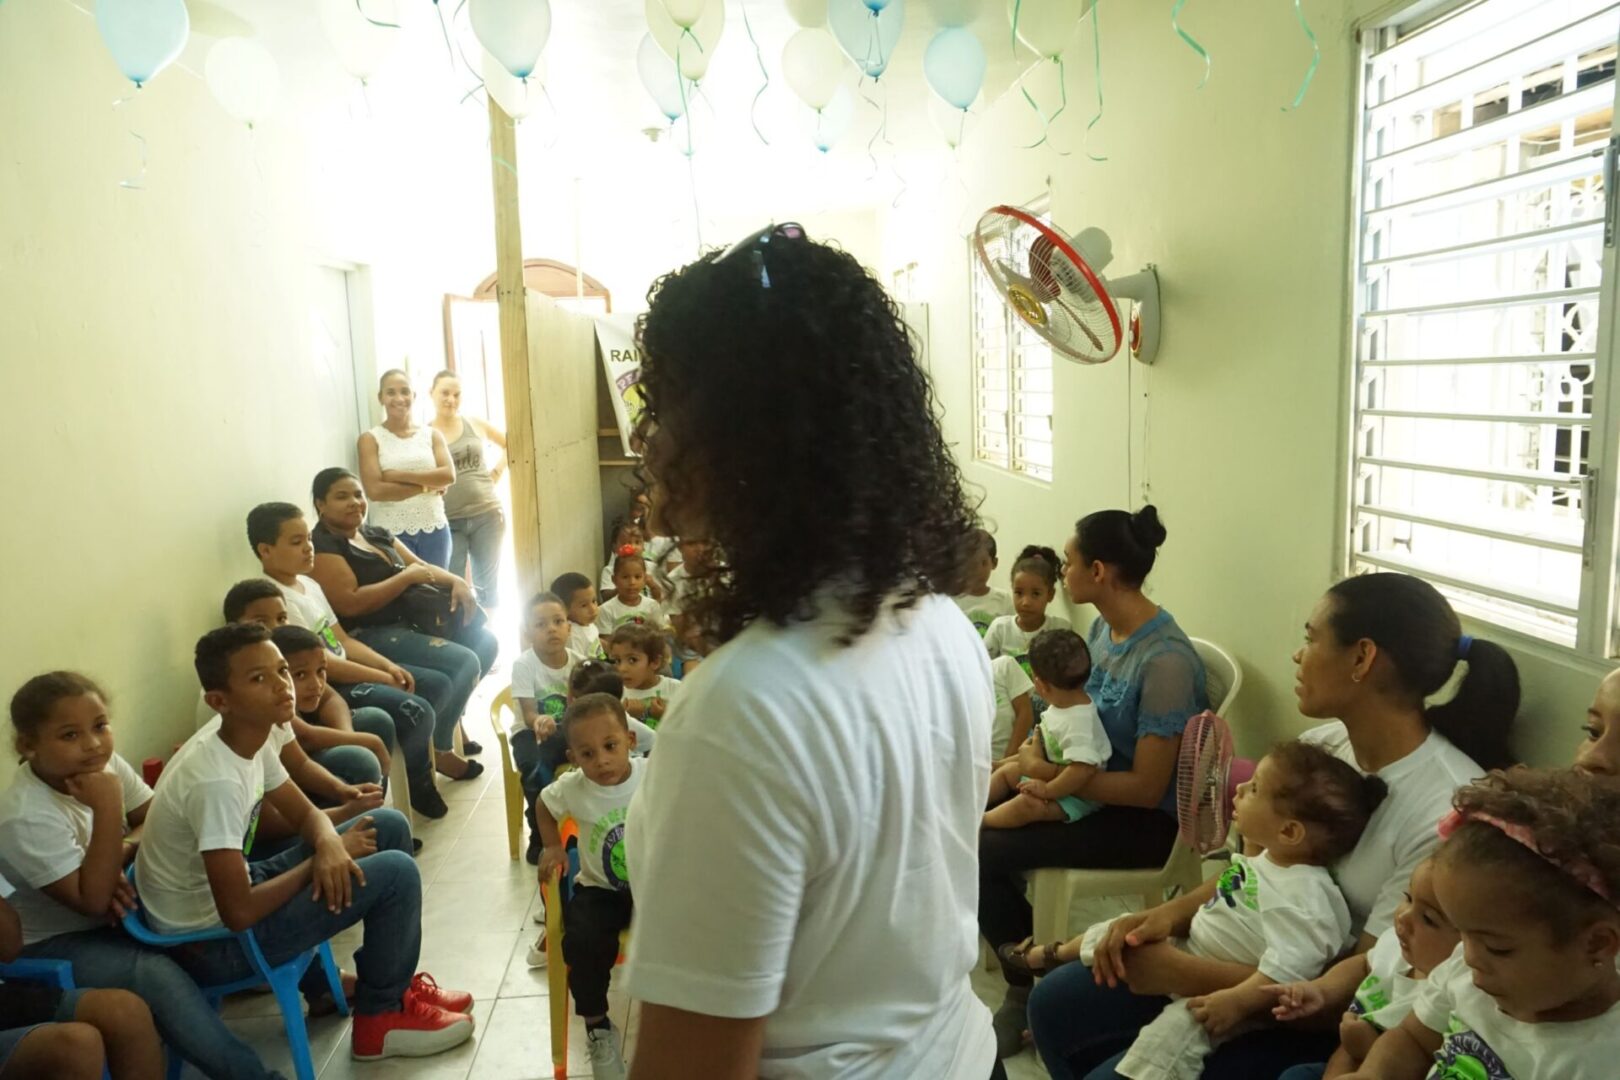 A woman in a small room in front of the children and their mothers